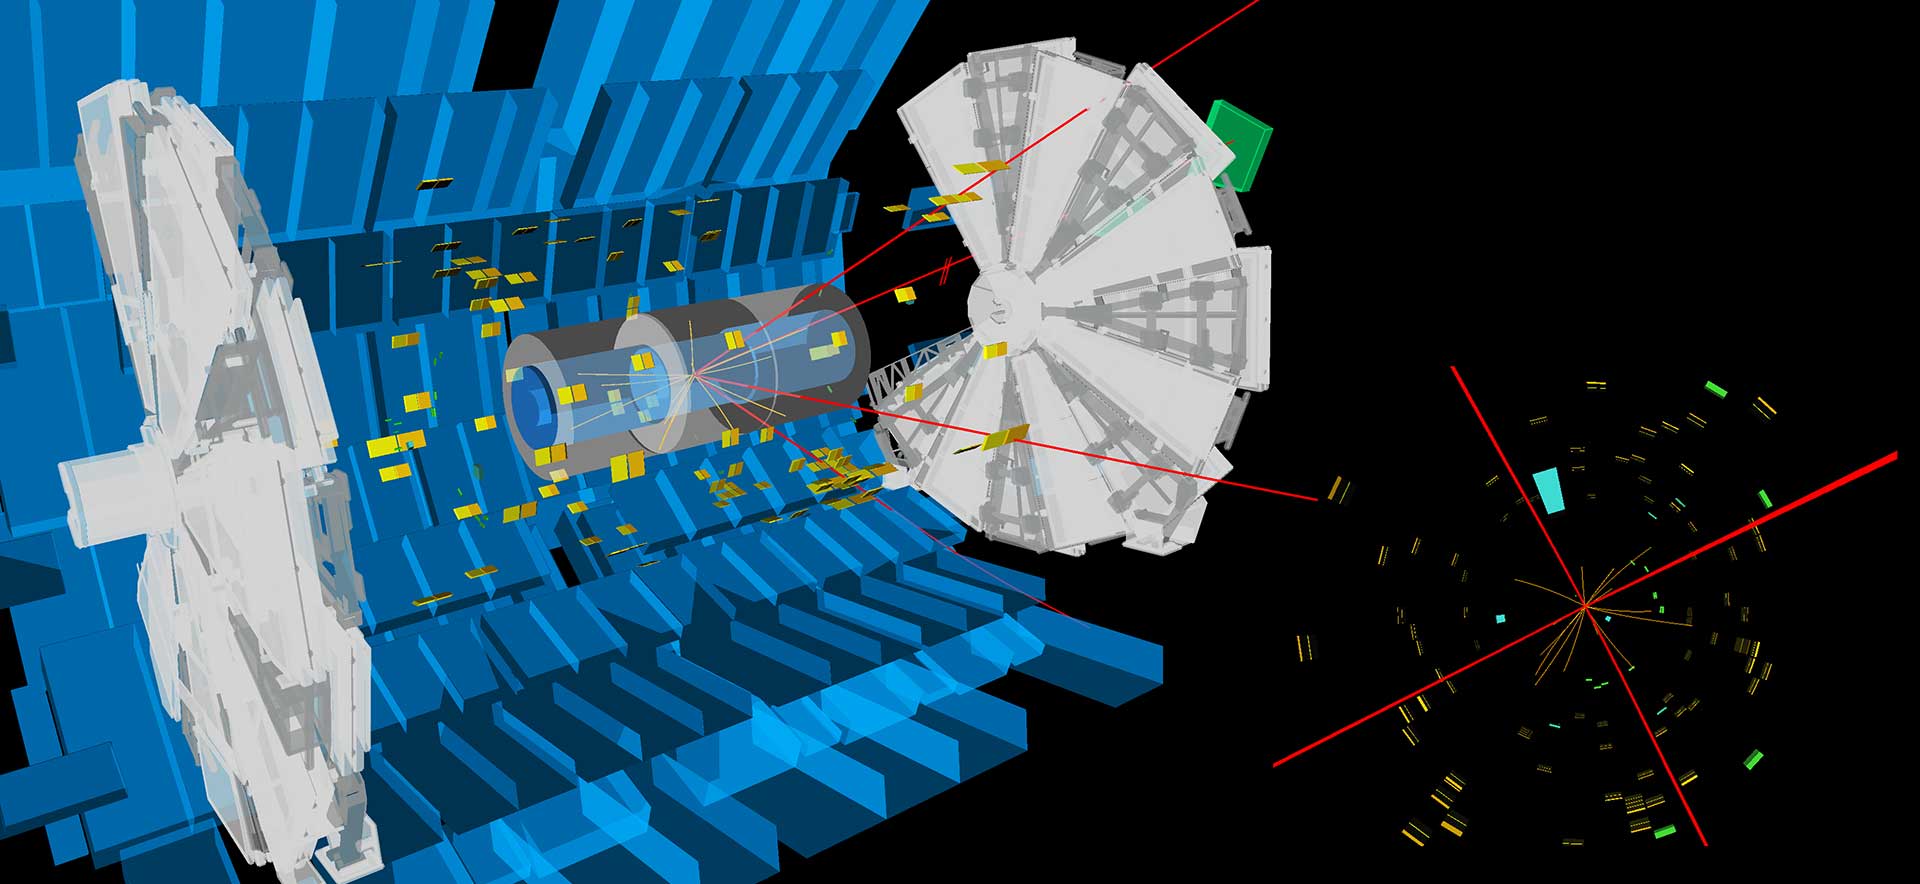 Illustration of a Higgs boson candidate decay to four muons